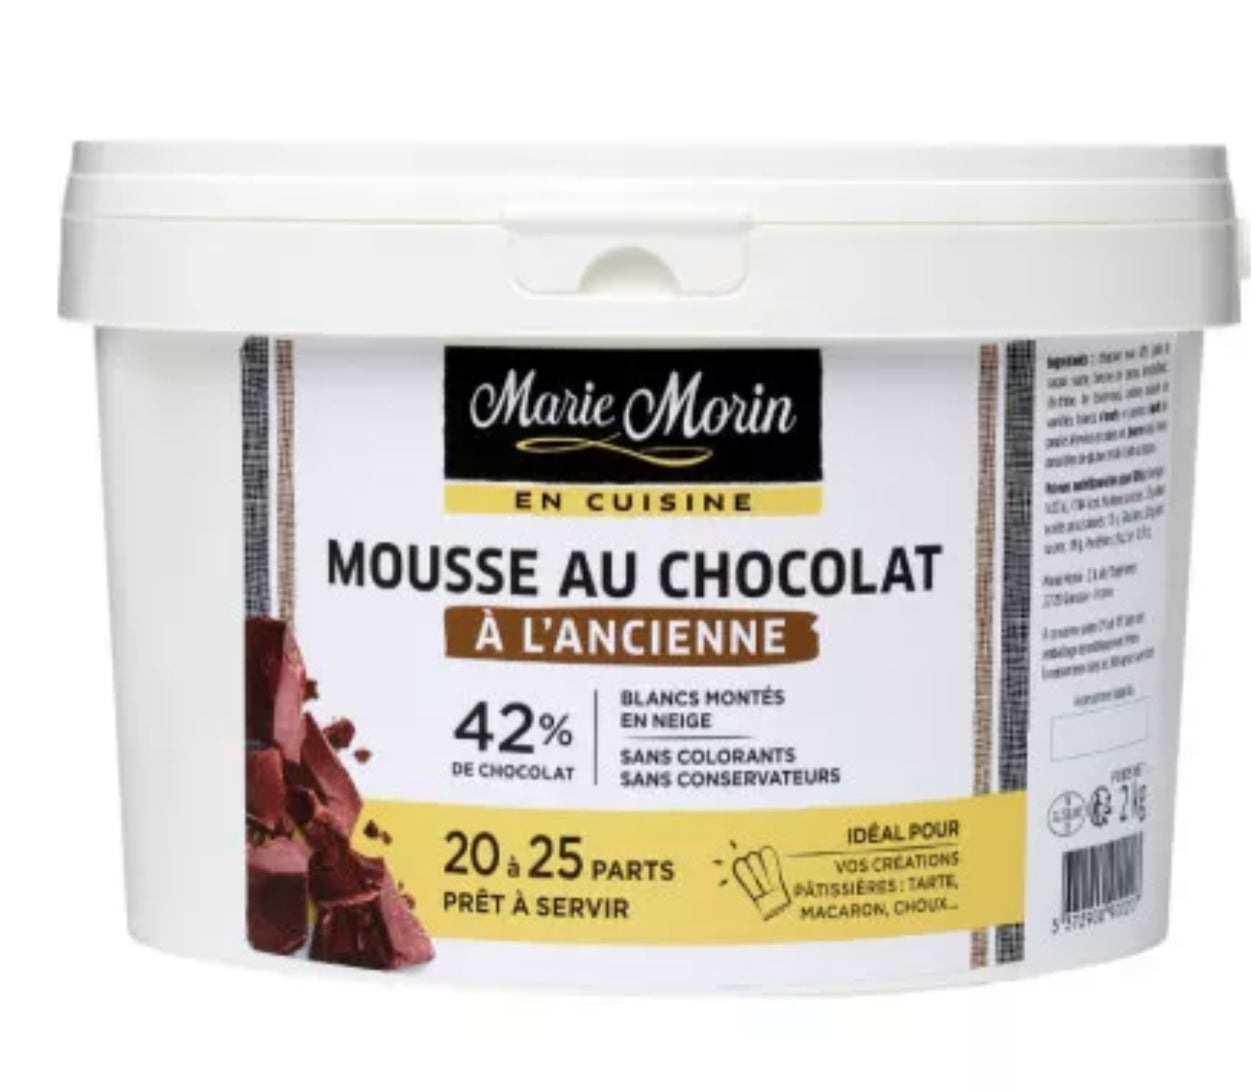 Old-fashioned dark chocolate mousse - 2kg